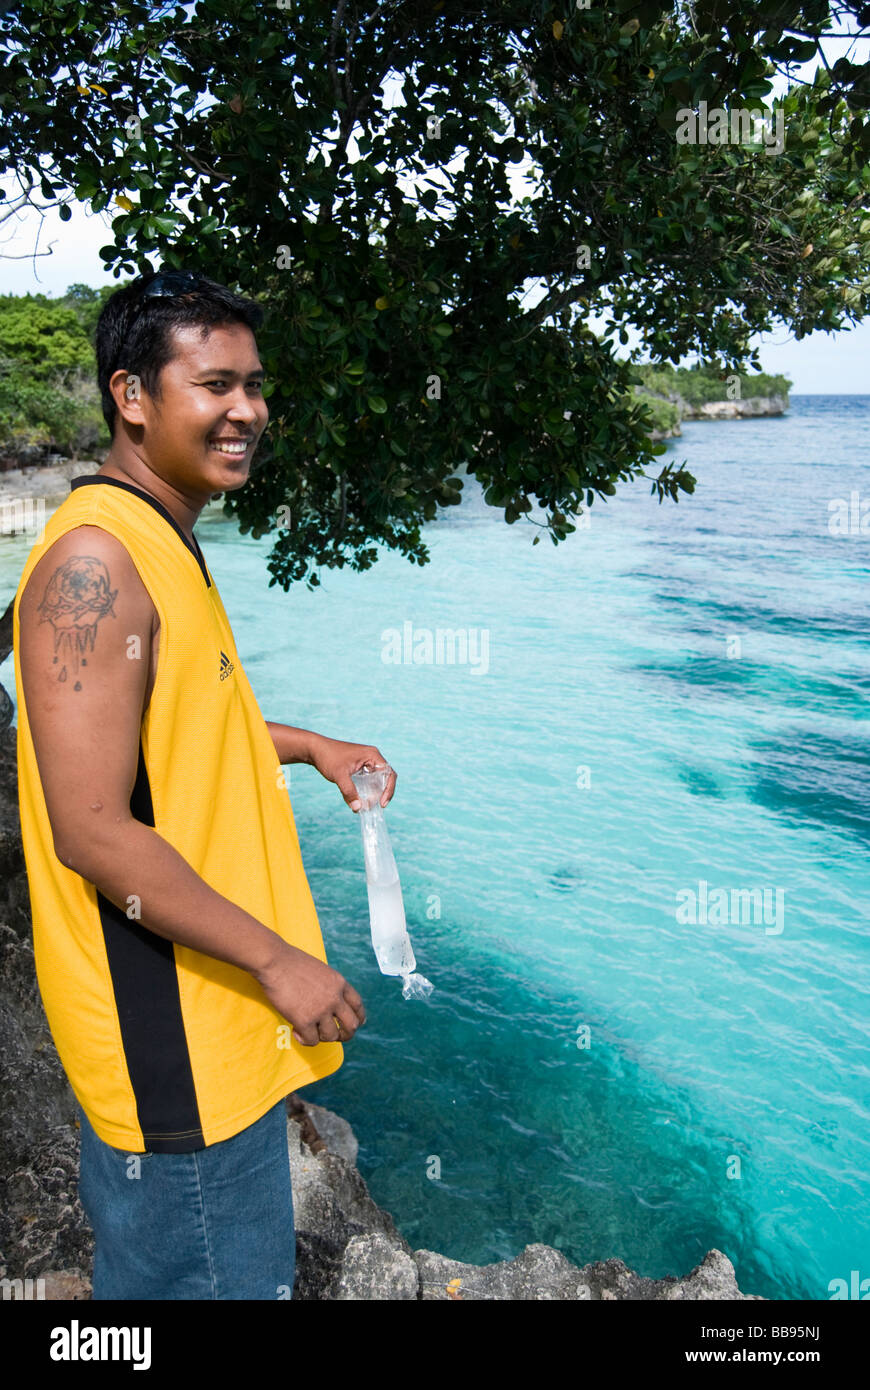 Guide holding a plastic bag full of water, overlooking a popular cliff-jumping spot on Siquijor island in the Philippines Stock Photo